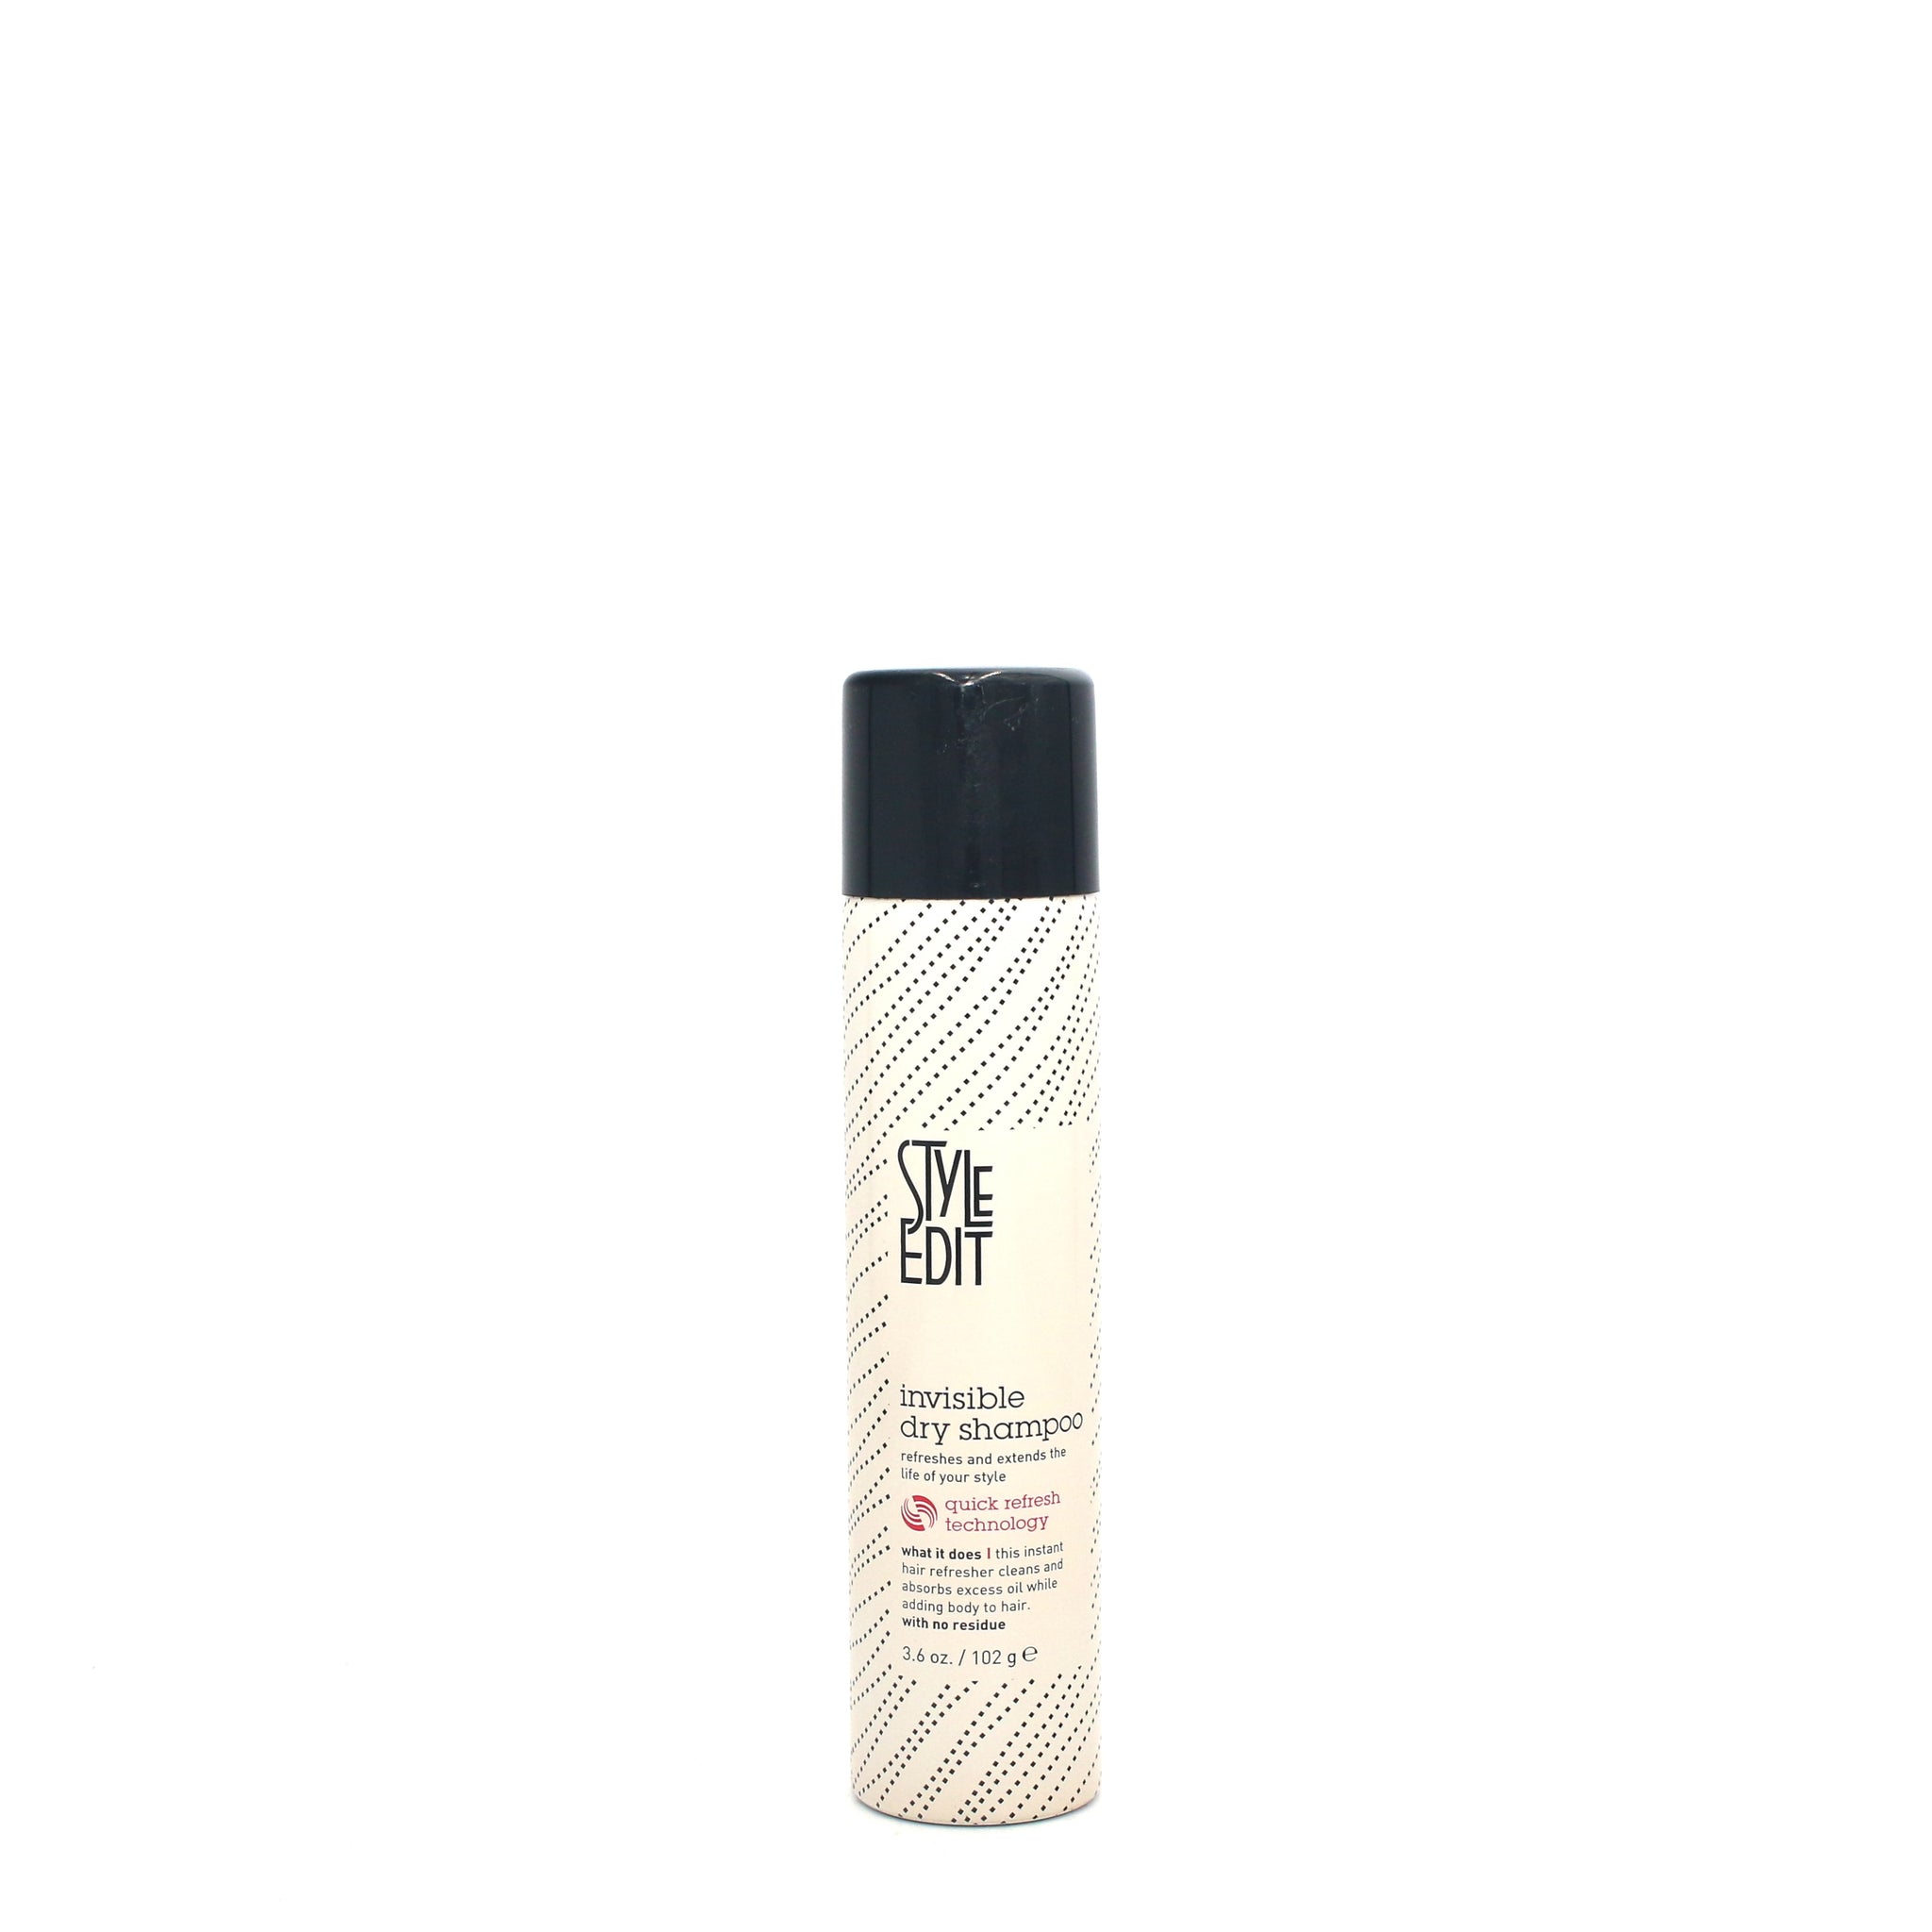 STYLE EDIT Invisible Dry Shampoo 3.6 oz (Pack of 2)